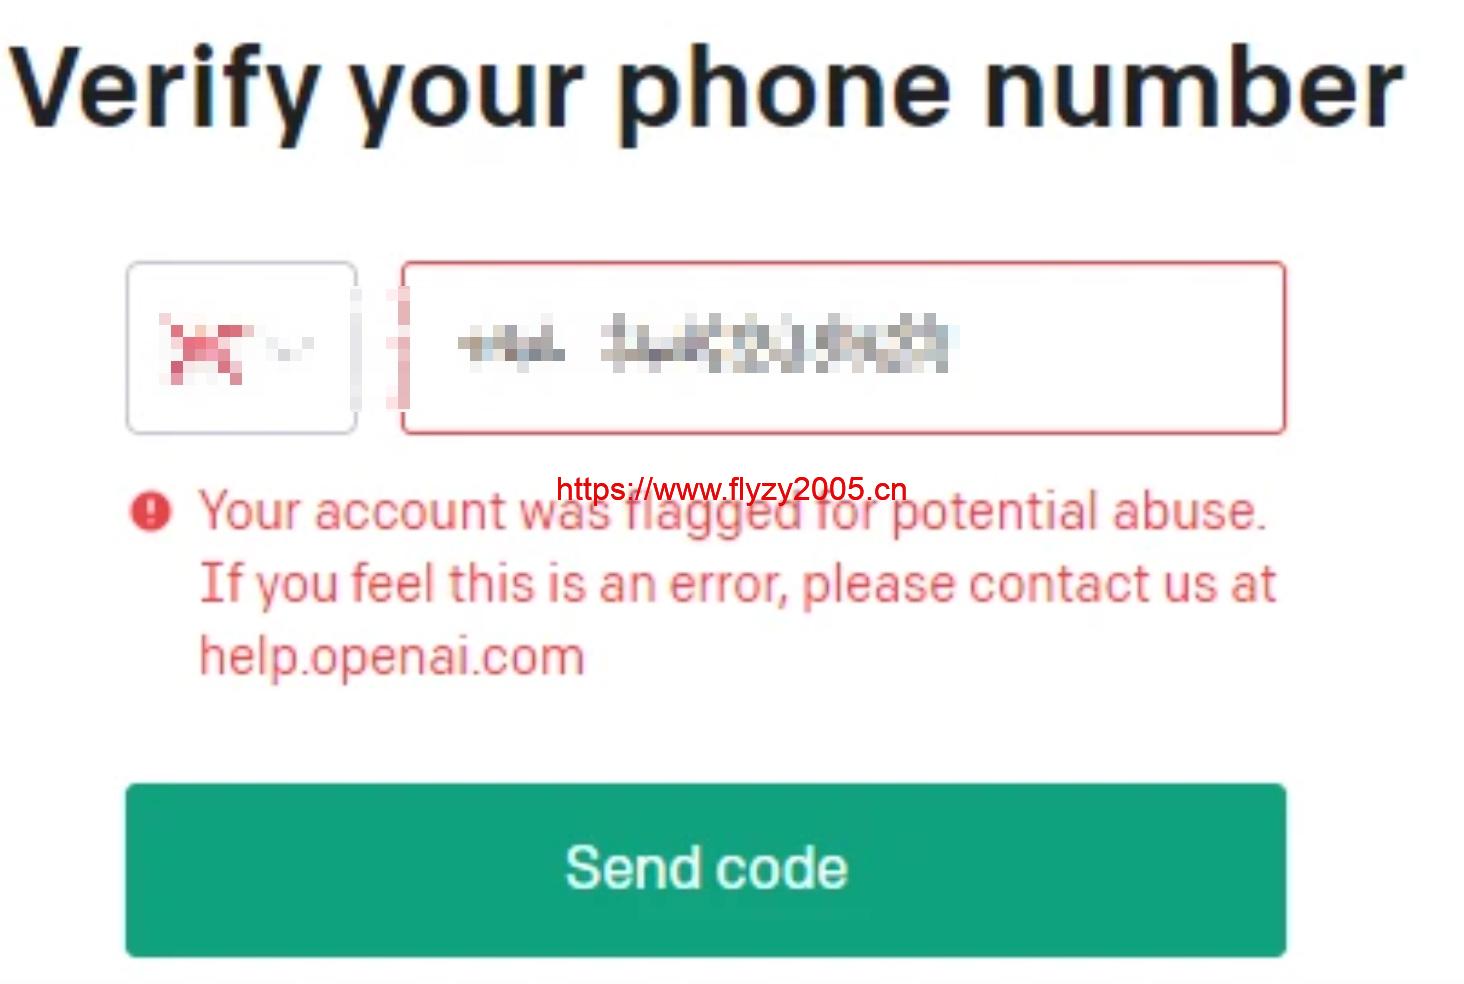 ChatGPT Your account was flagged for potential abuse（您的帐户被标记为可能存在滥用行为）